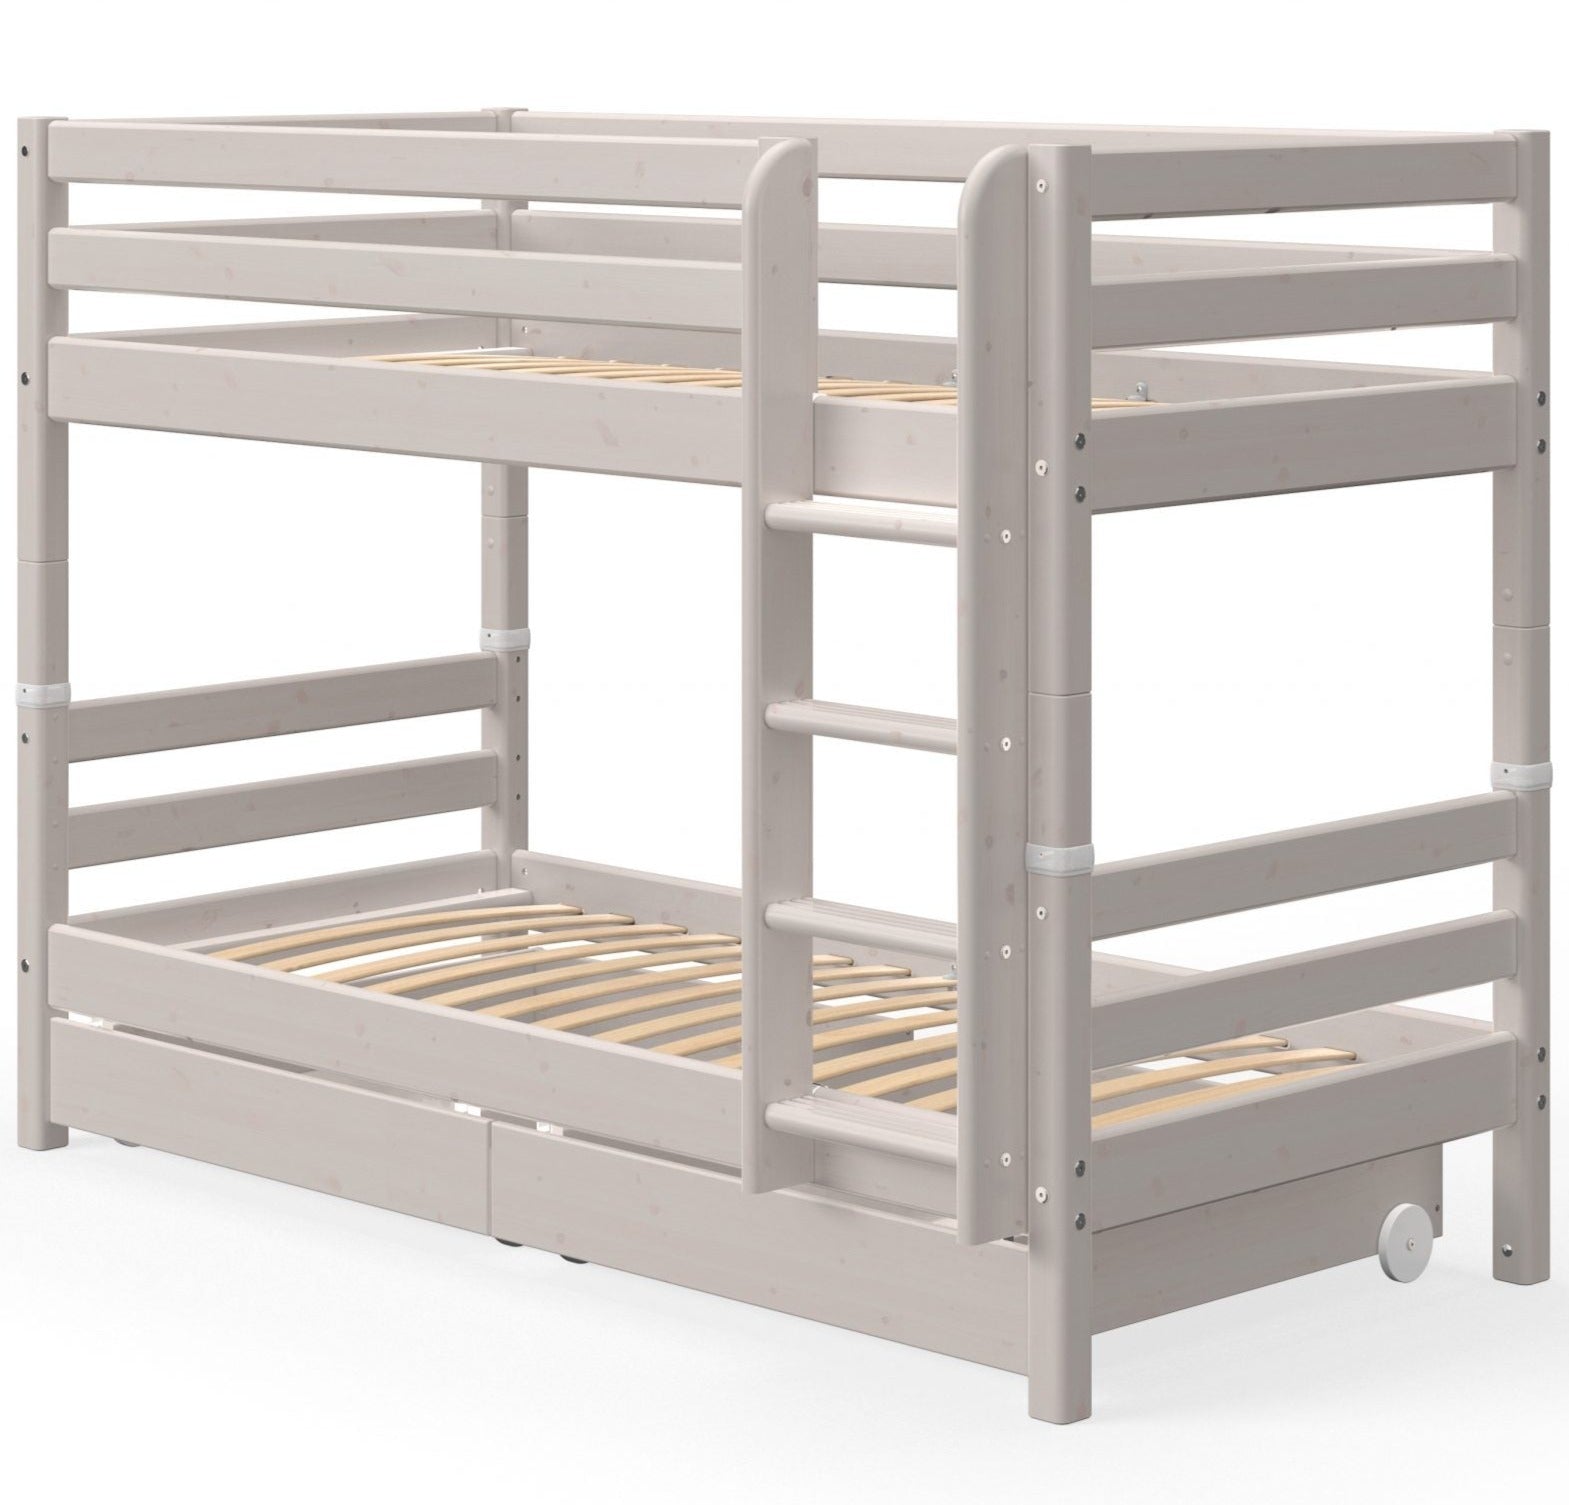 Flexa Classic Bunk Bed with Optional Drawers